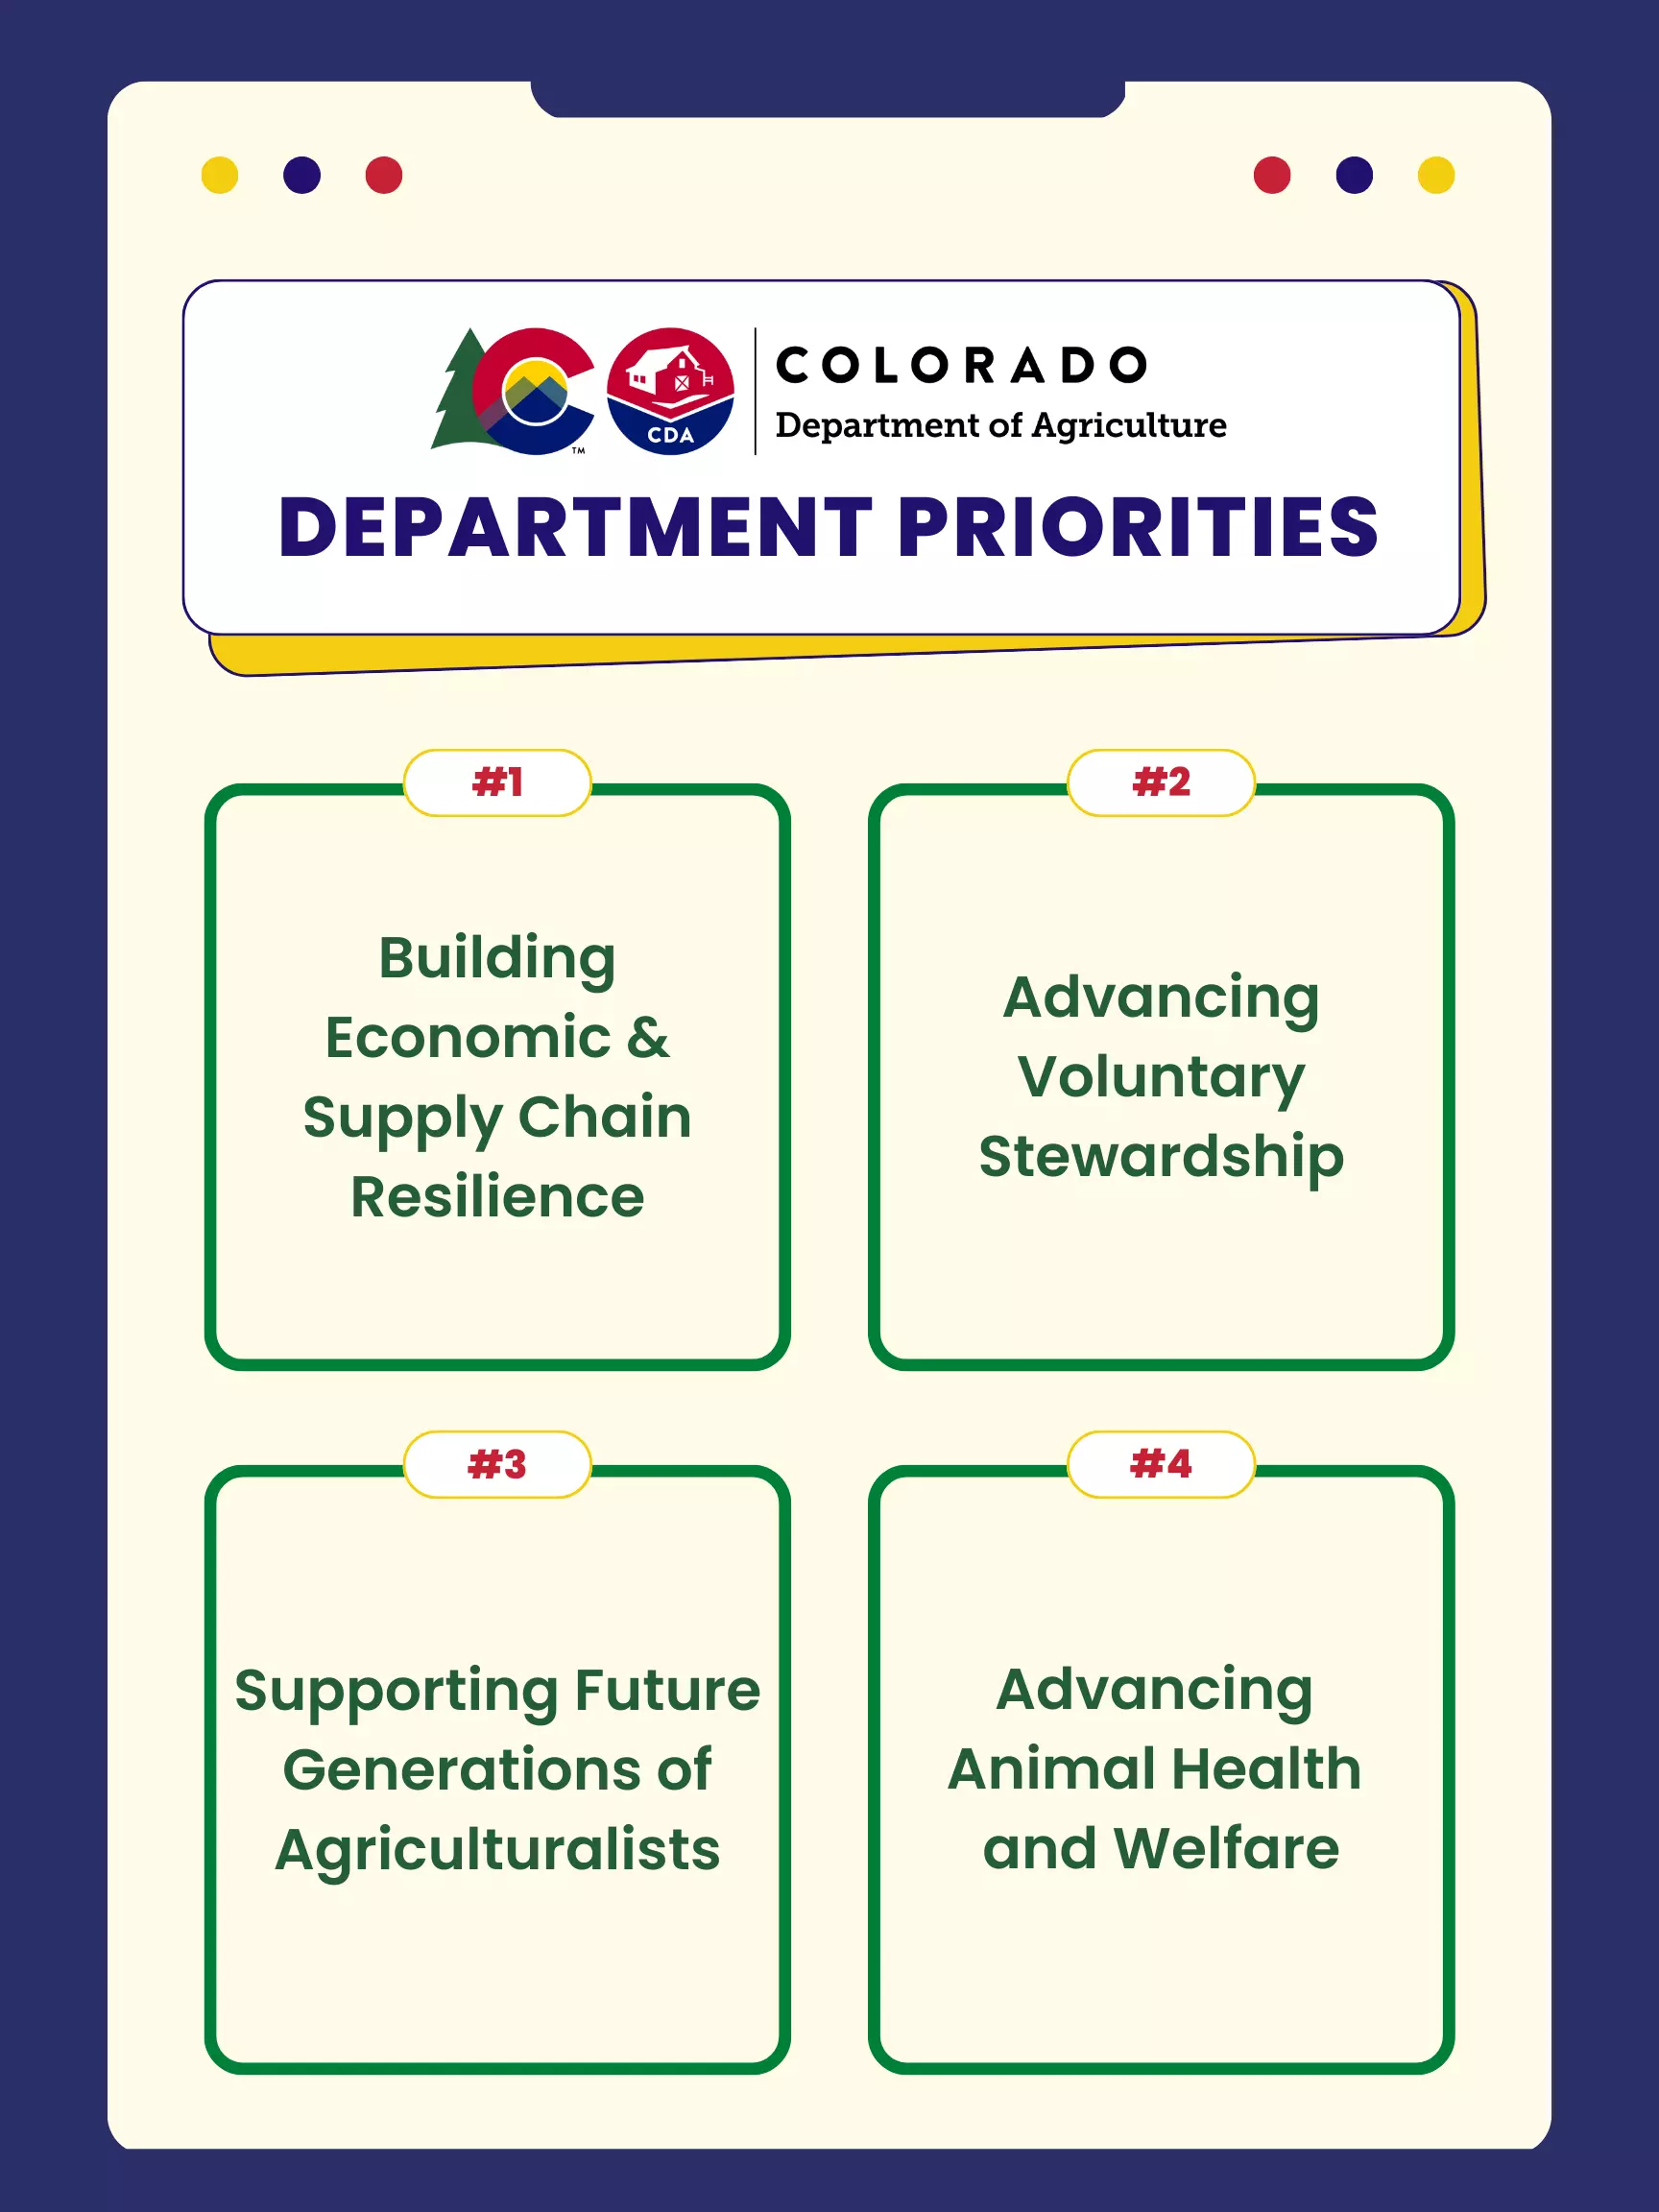 CDA Priorities: 1. Building Economic & Supply Chain Resilience 2. Advancing Voluntary Stewardship 3. Supporting Future Generations of Agriculturalists 4. Advancing  Animal Health and Welfare